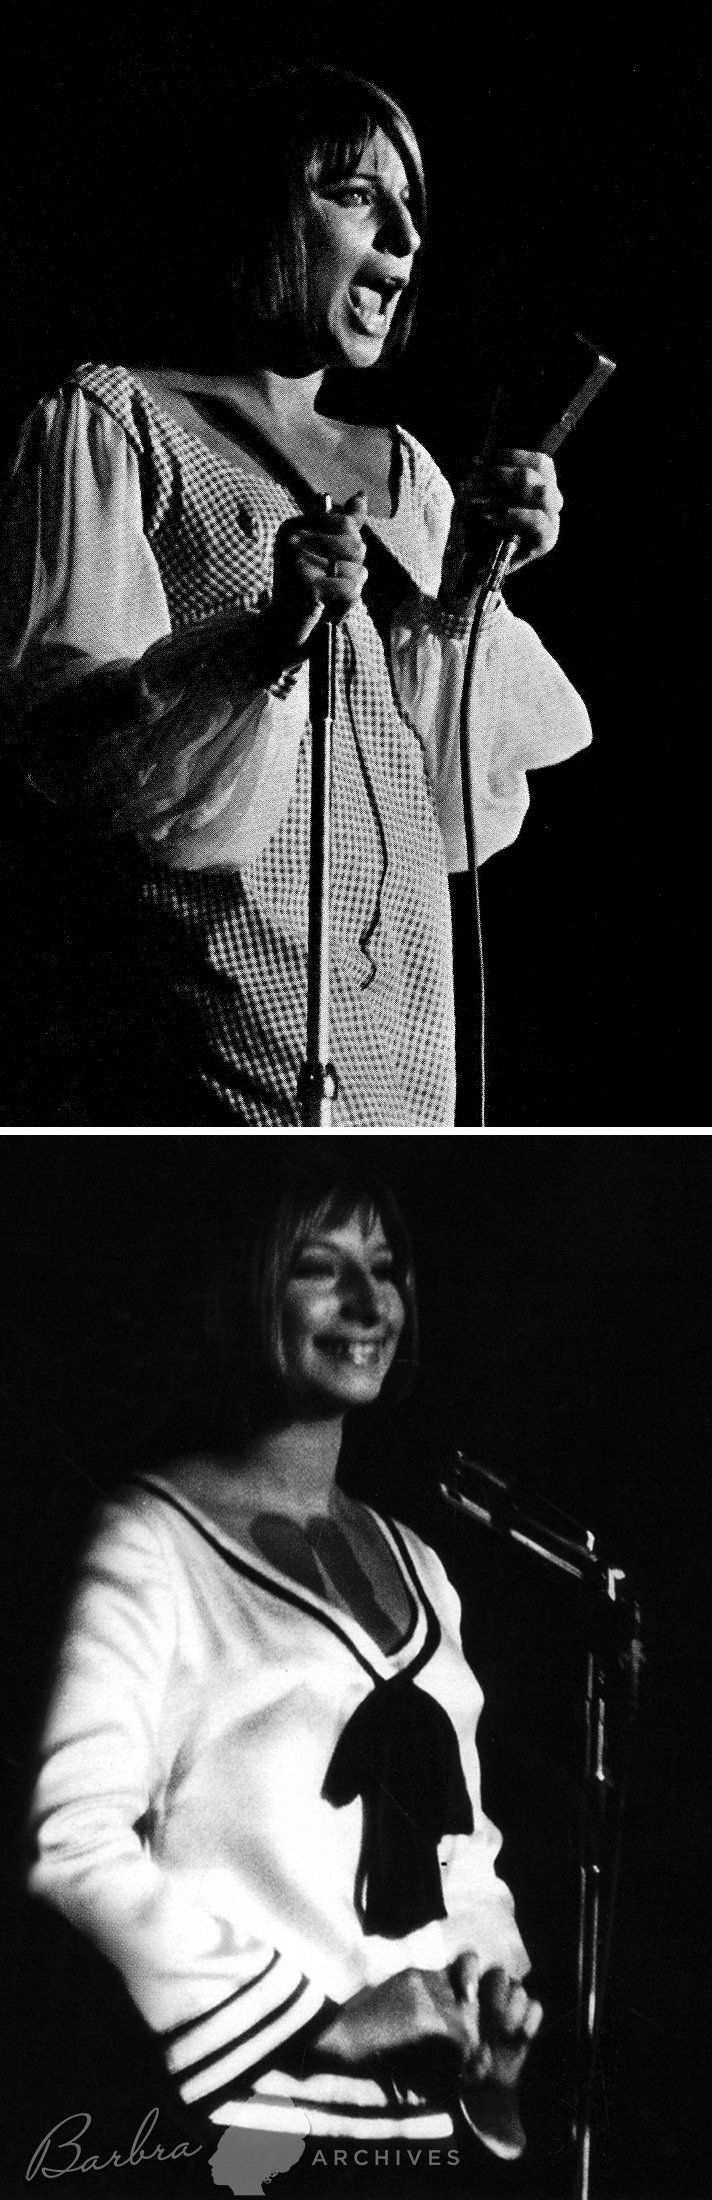 Two photos of Barbra Streisand at the microphone from the Cocoanut Grove gig.